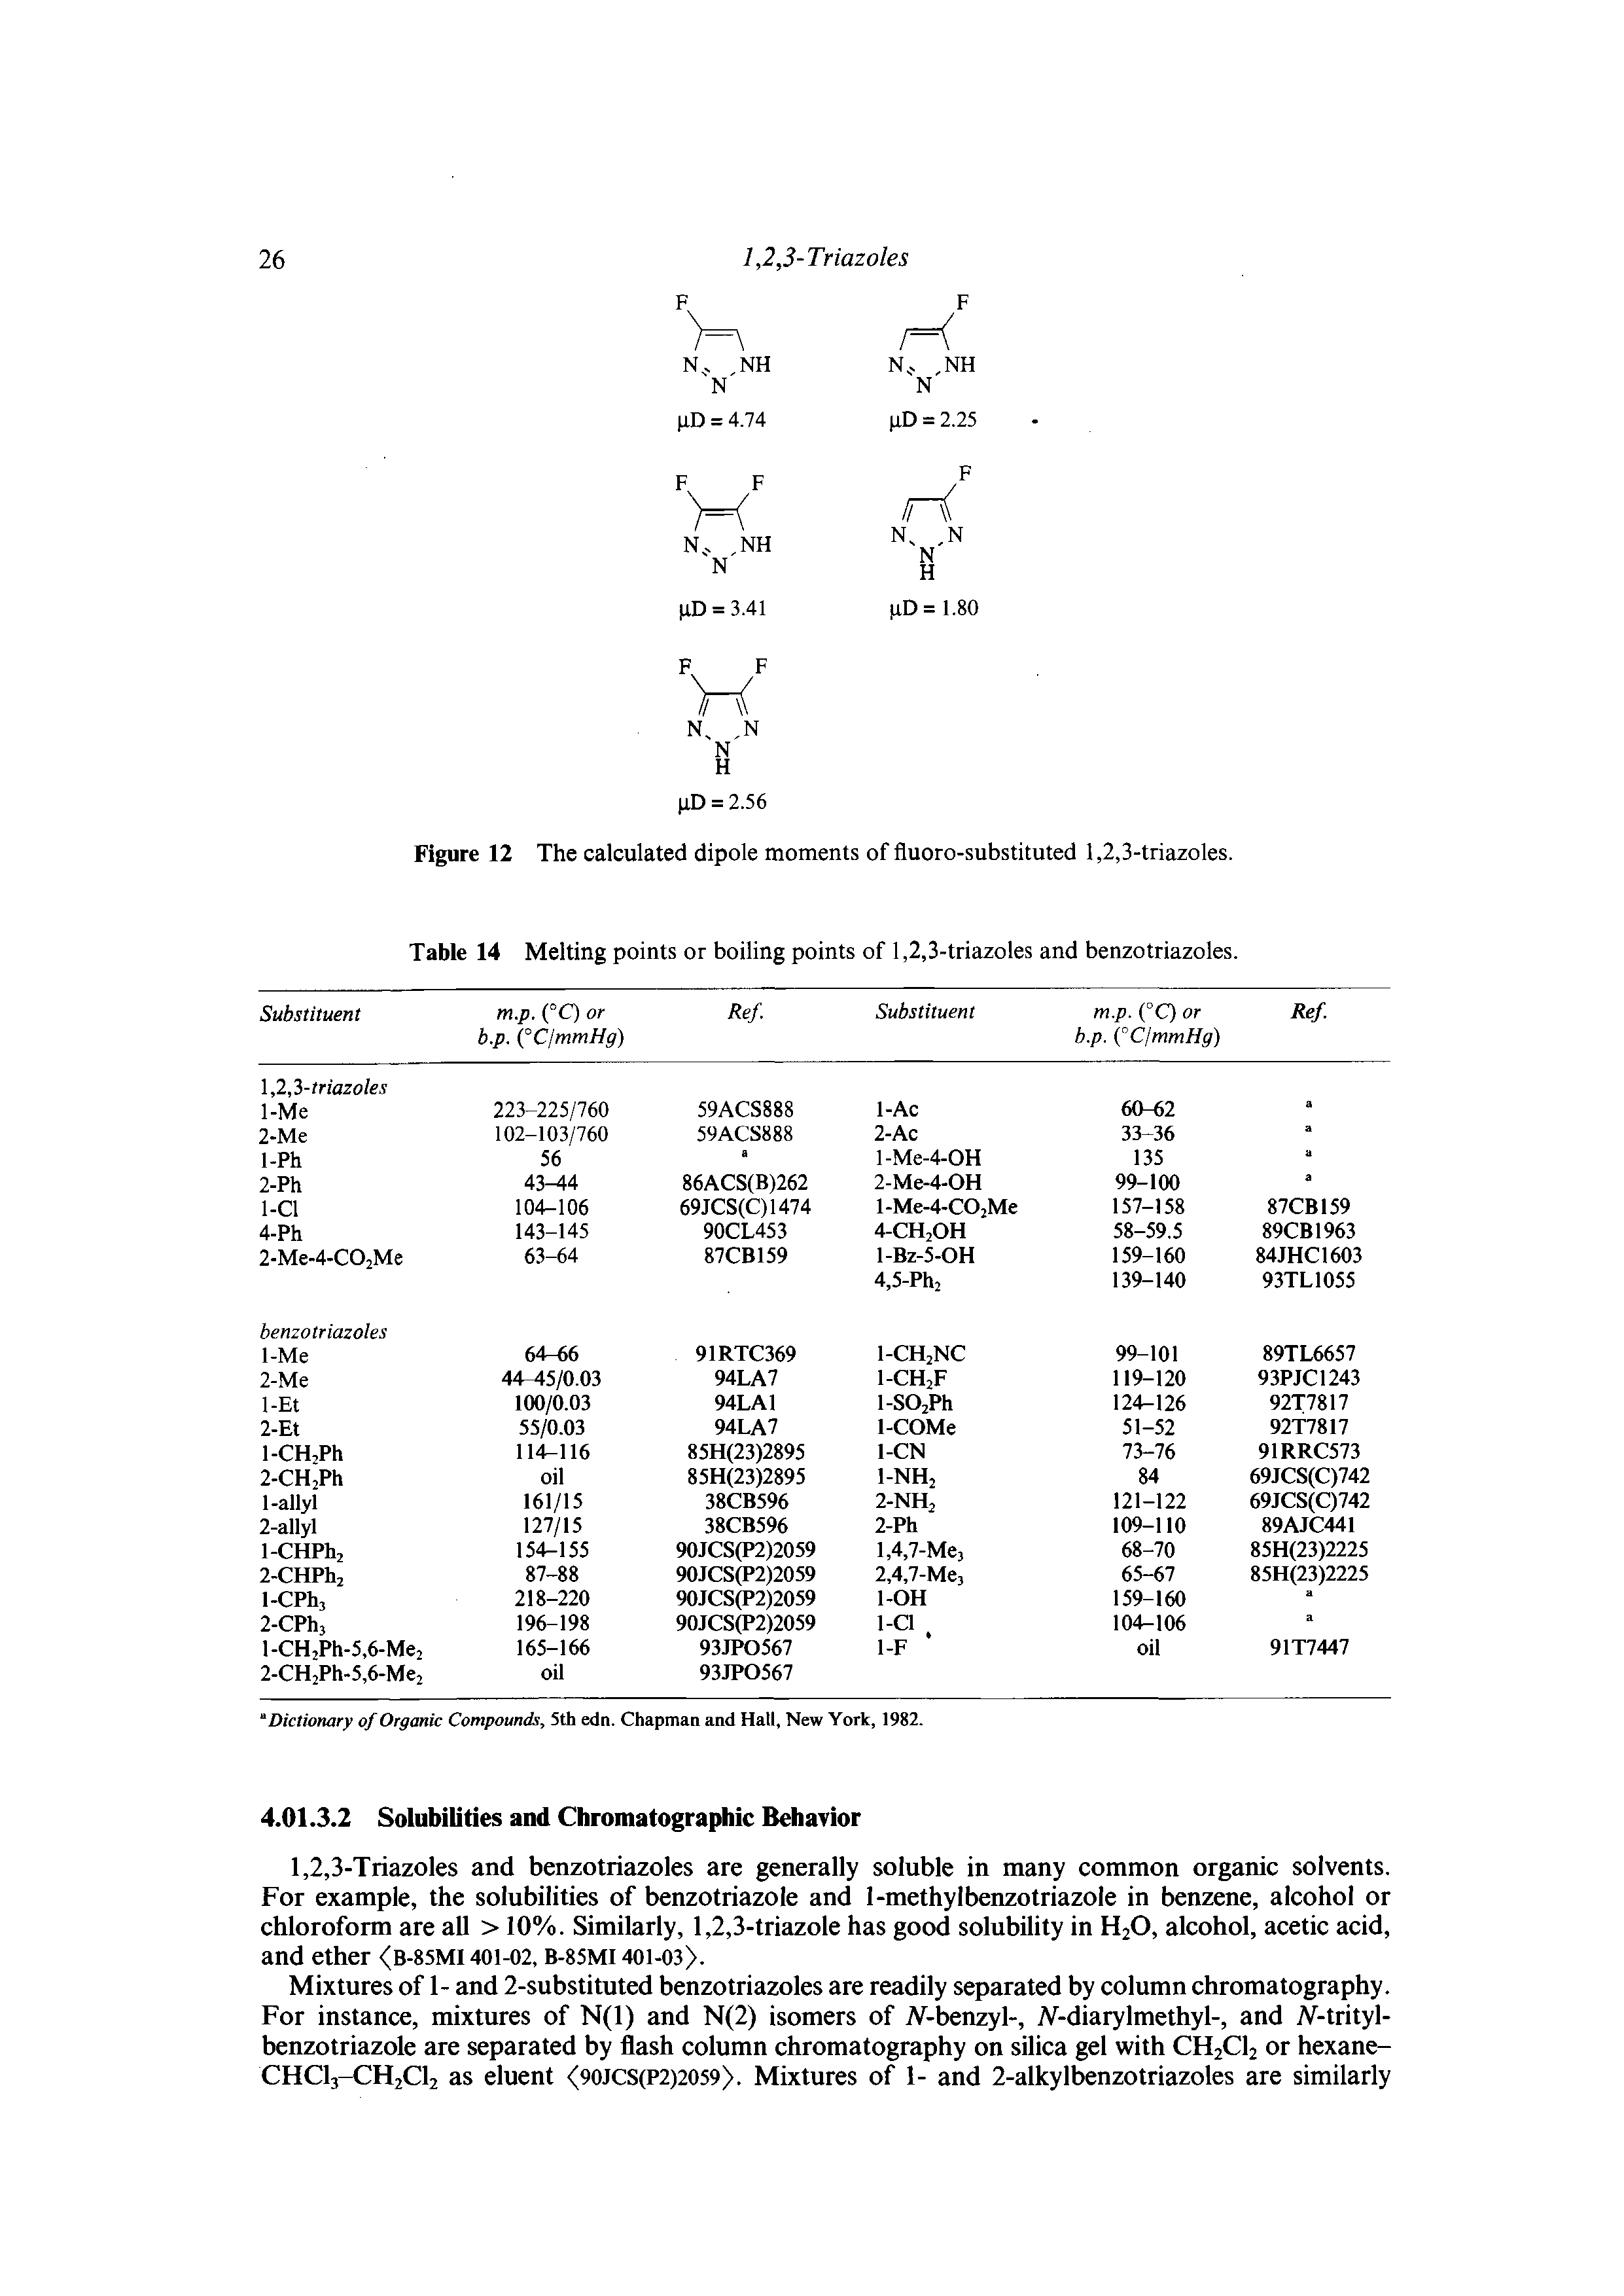 Figure 12 The calculated dipole moments of fluoro-substituted 1,2,3-triazoles. Table 14 Melting points or boiling points of 1,2,3-triazoles and benzotriazoles.